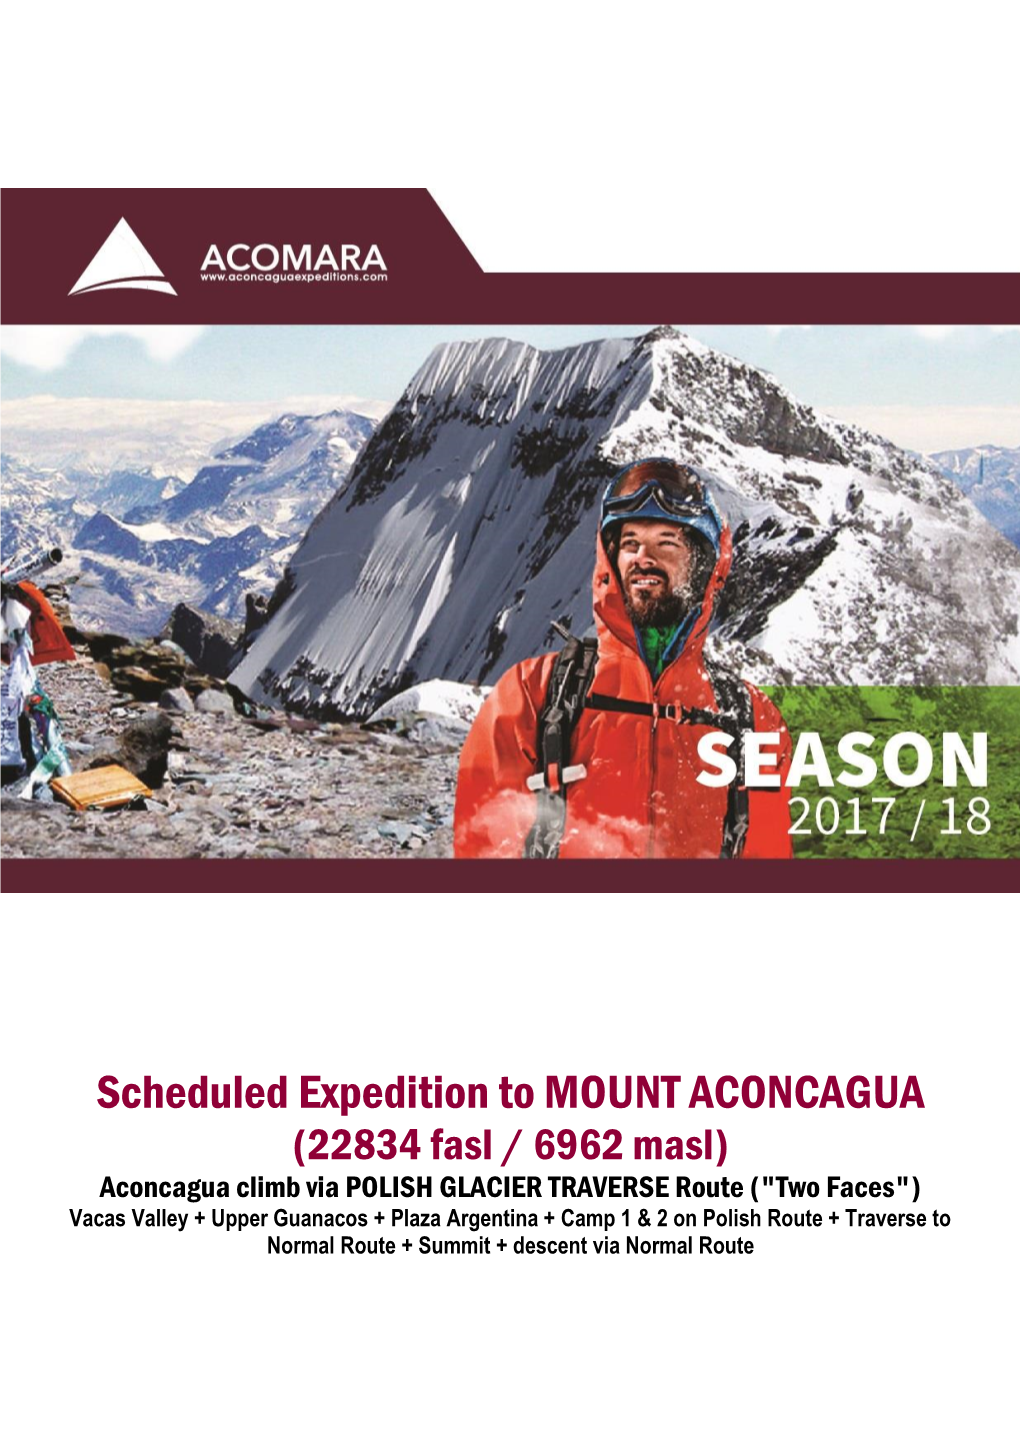 Scheduled Expedition to MOUNT ACONCAGUA